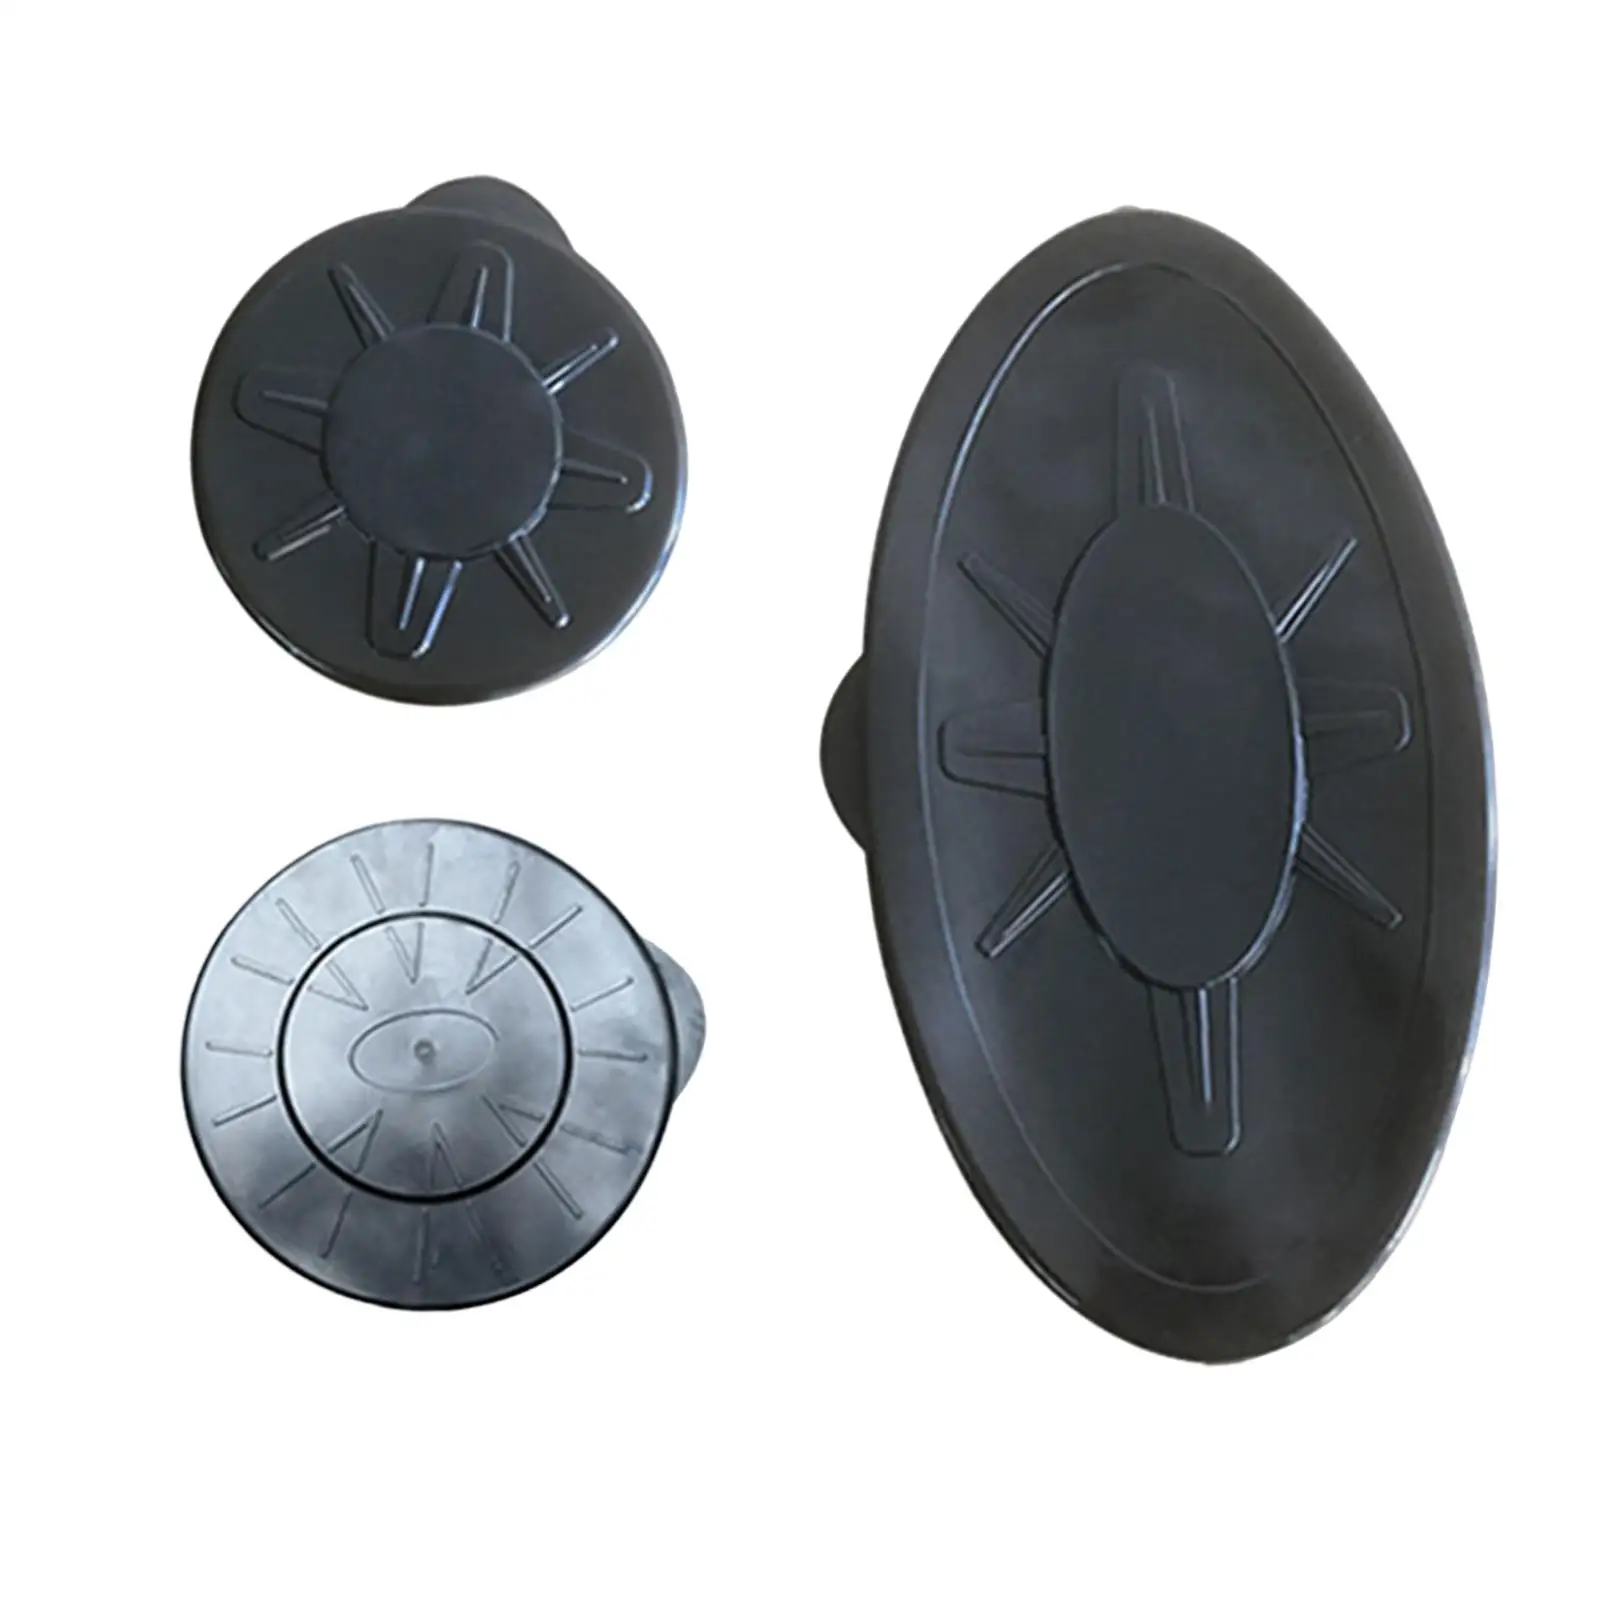 Kayak Hatches 9 inch Round/Oval Lock Hatch Accessories Parts Access Cover Replacement Hatches for Boat Canoes Marine Kayak